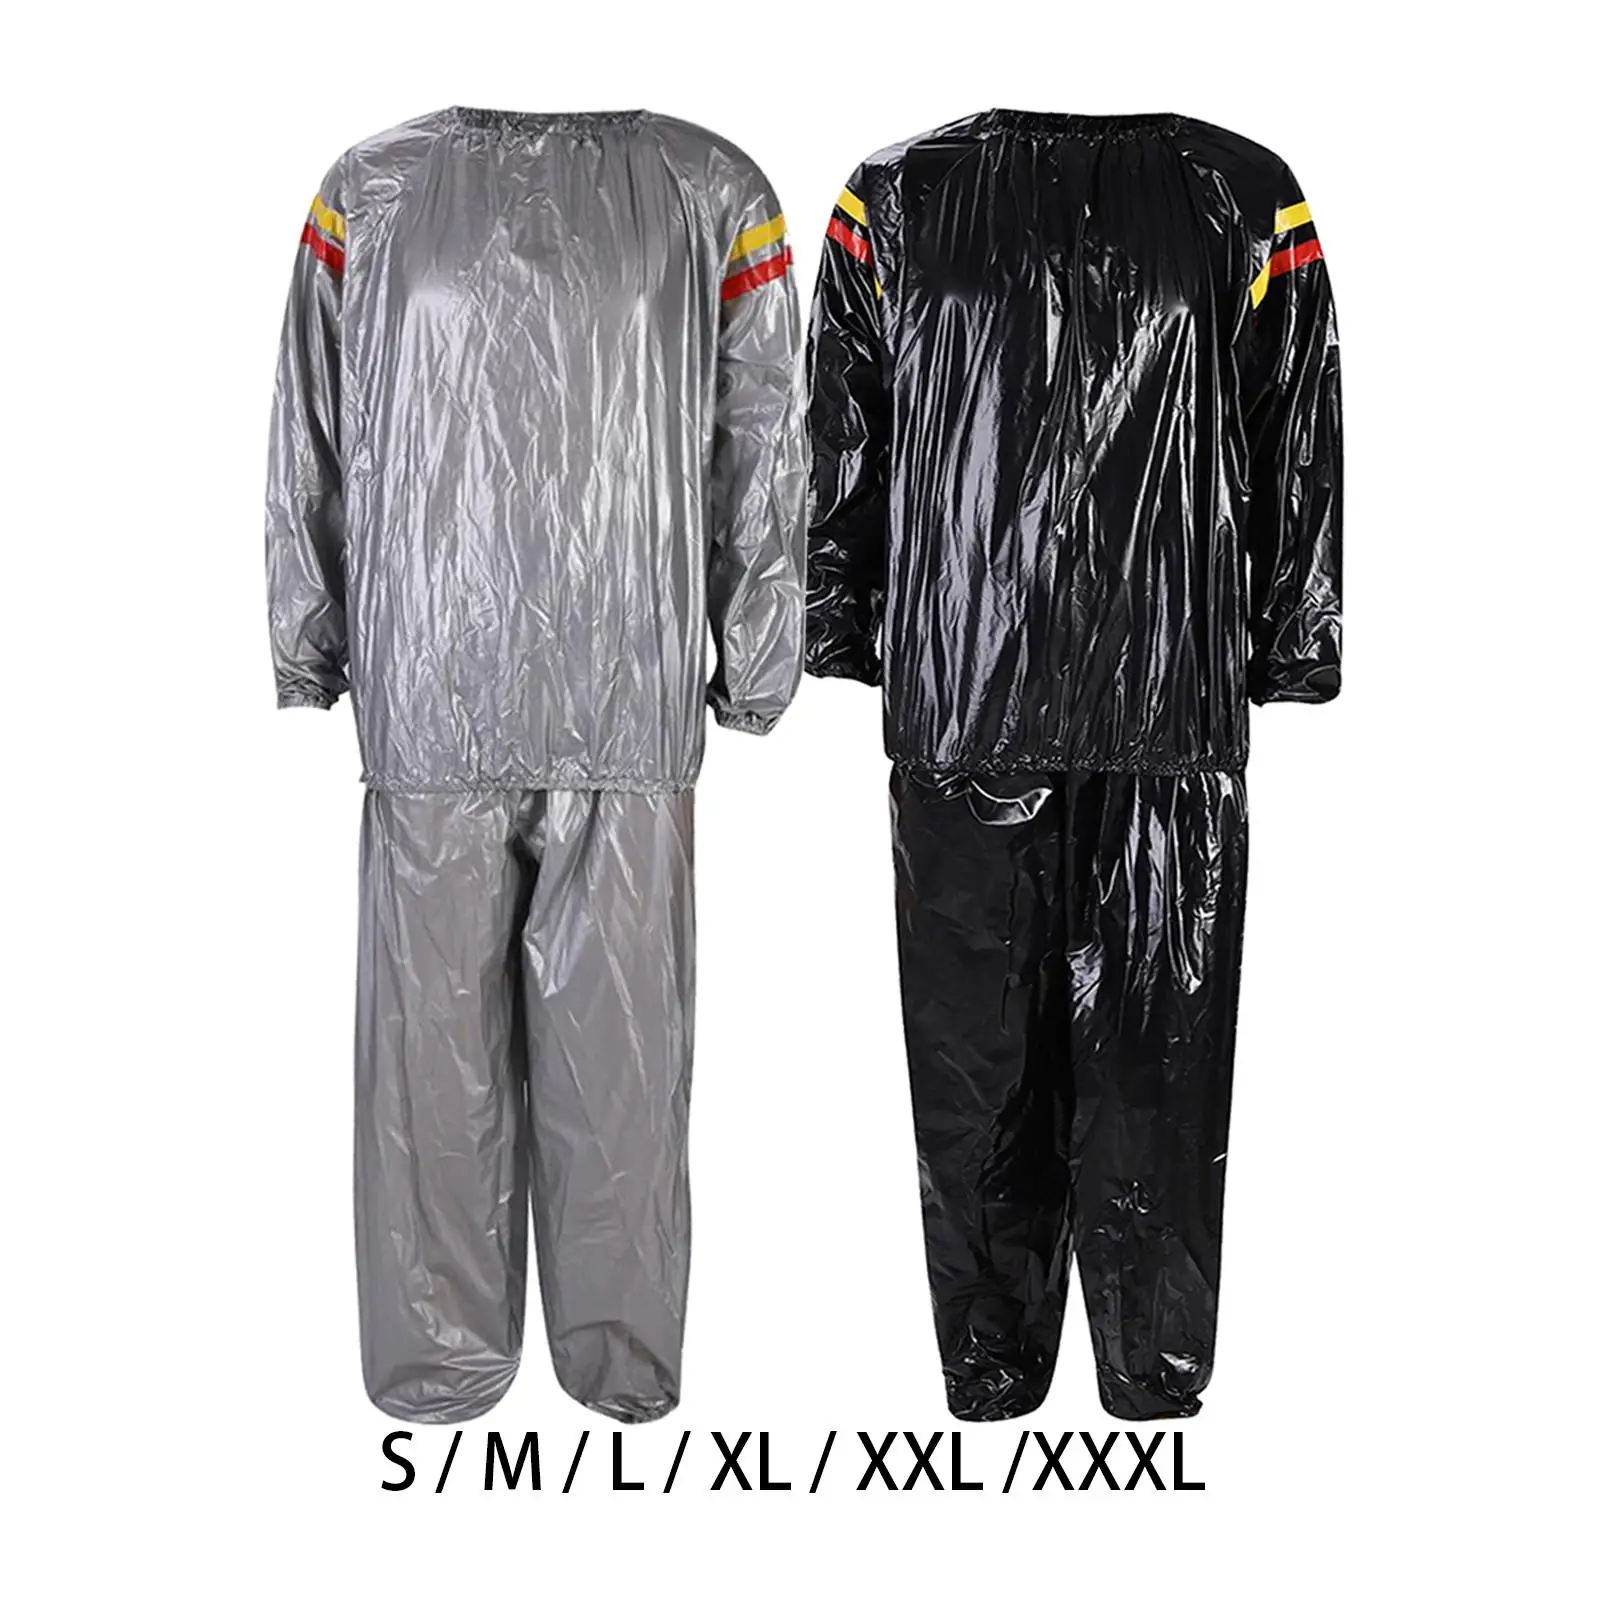 Fitness Sauna Suit Gym Sweat Suit Home Pants Shirt Lose Weight Track Suit